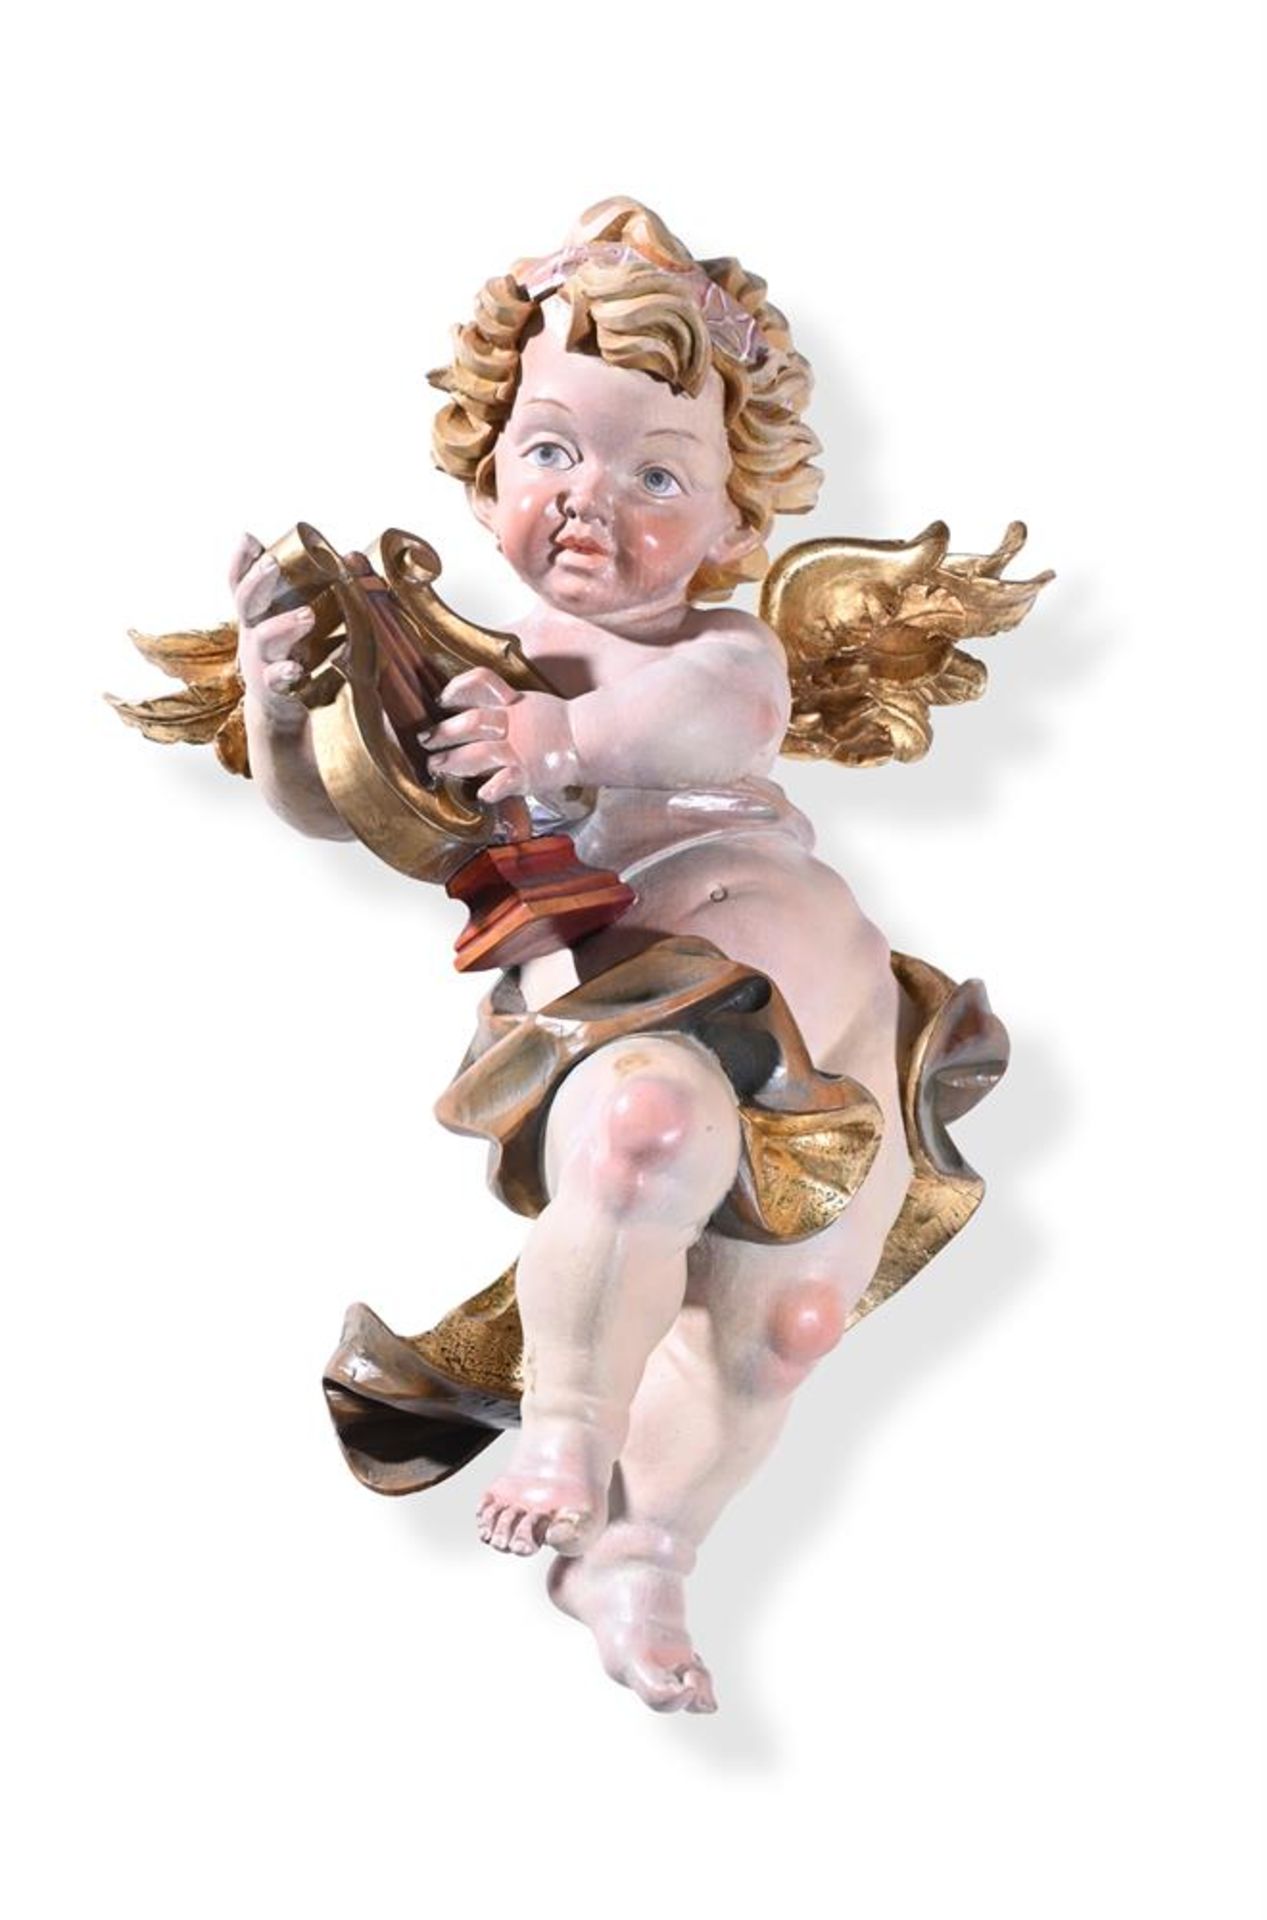 A CARVED SOFT WOOD FIGURE OF AN ANGEL IN FLIGHT LATE 19TH, EARLY 20TH CENTURY - Image 2 of 2